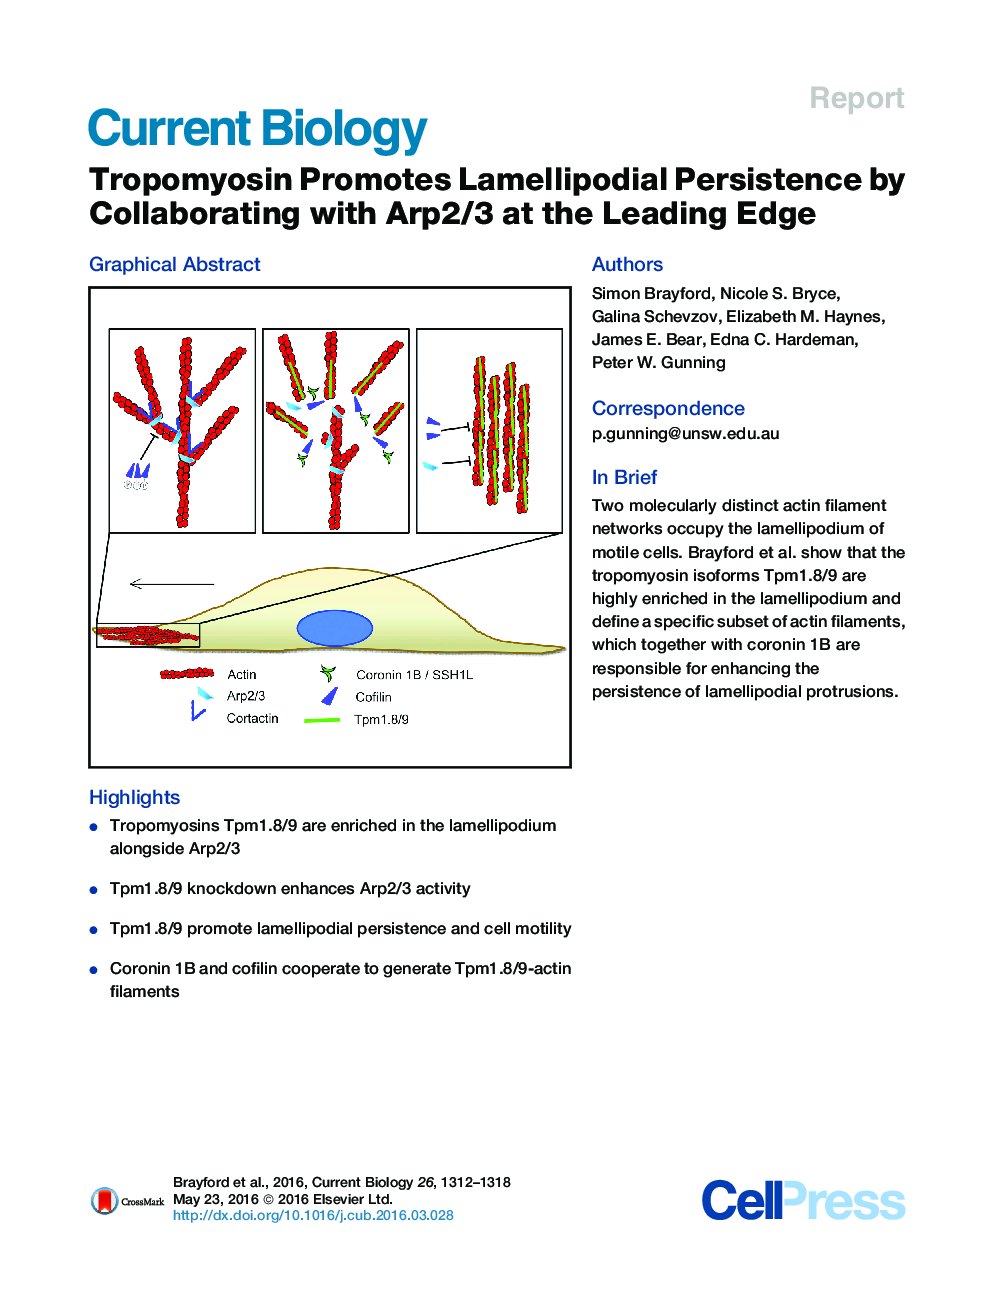 Tropomyosin Promotes Lamellipodial Persistence by Collaborating with Arp2/3 at the Leading Edge